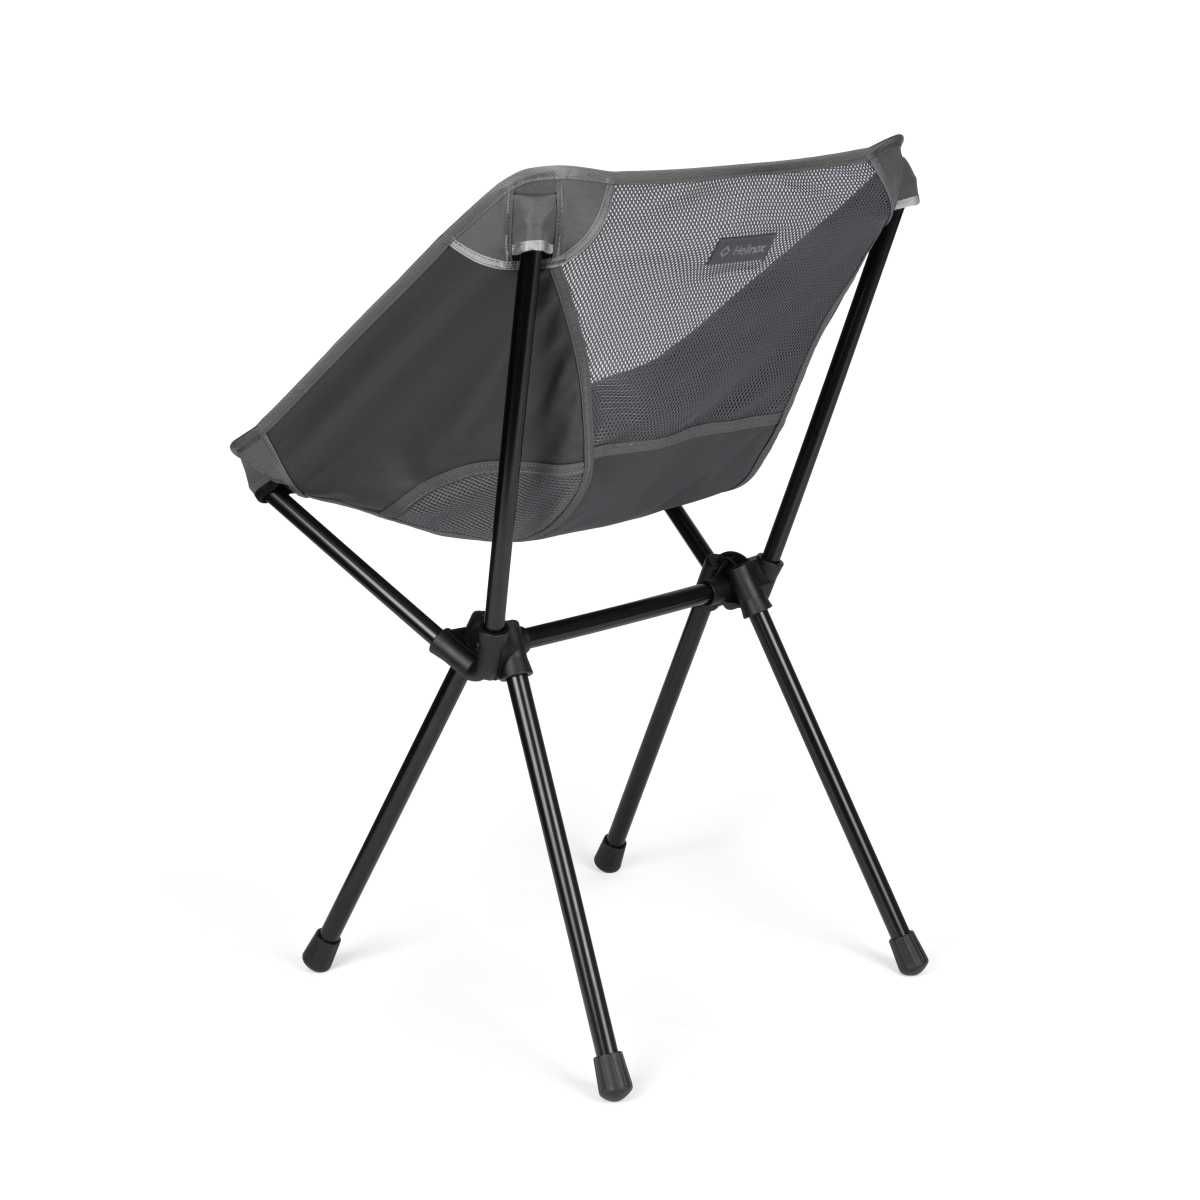 HELINOX Cafe Chair Charcoal Campingstuhl 10002807